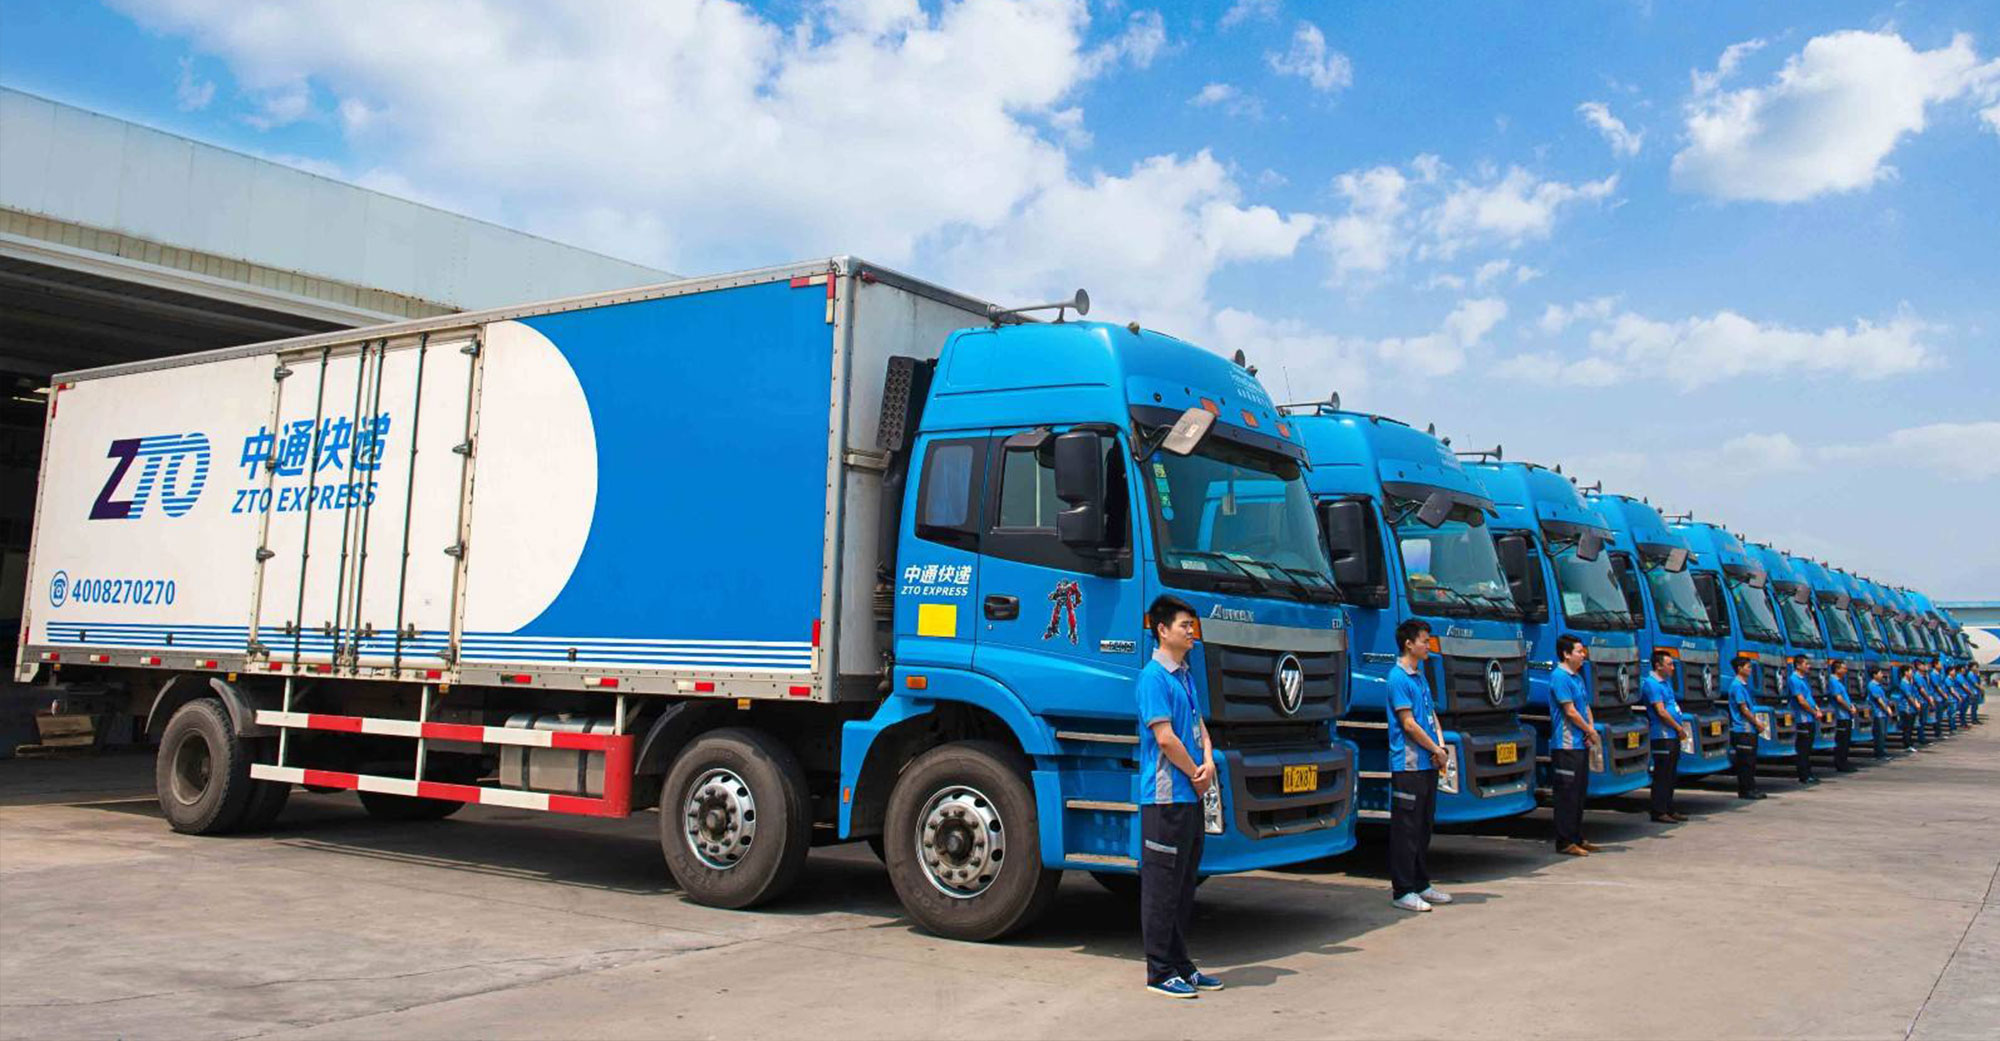 CALISTA freight exchange expands ZTO’s outreach in China and beyond while providing timely and accurate compliance filing service